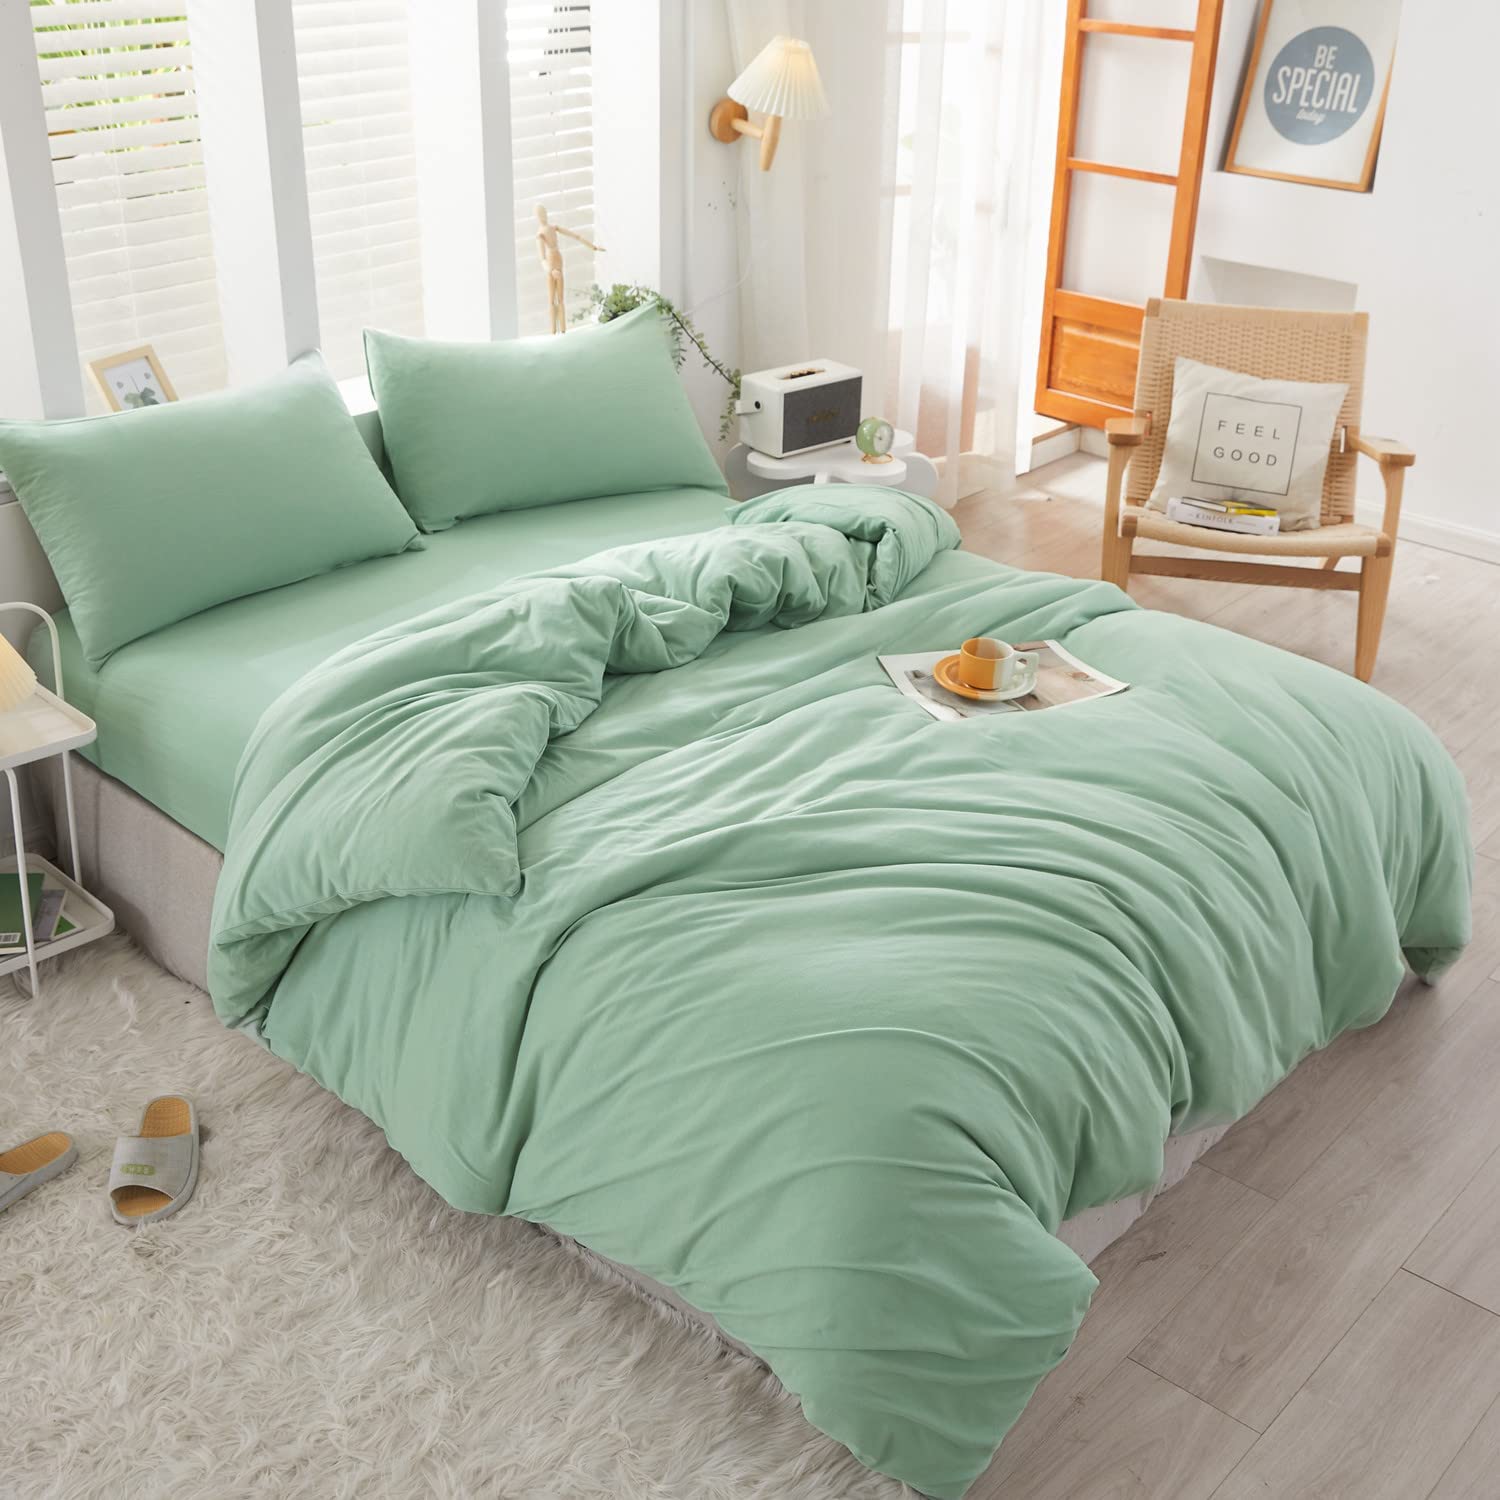 Housse Couette Vert Clair + Taies d'oreillers Offerts